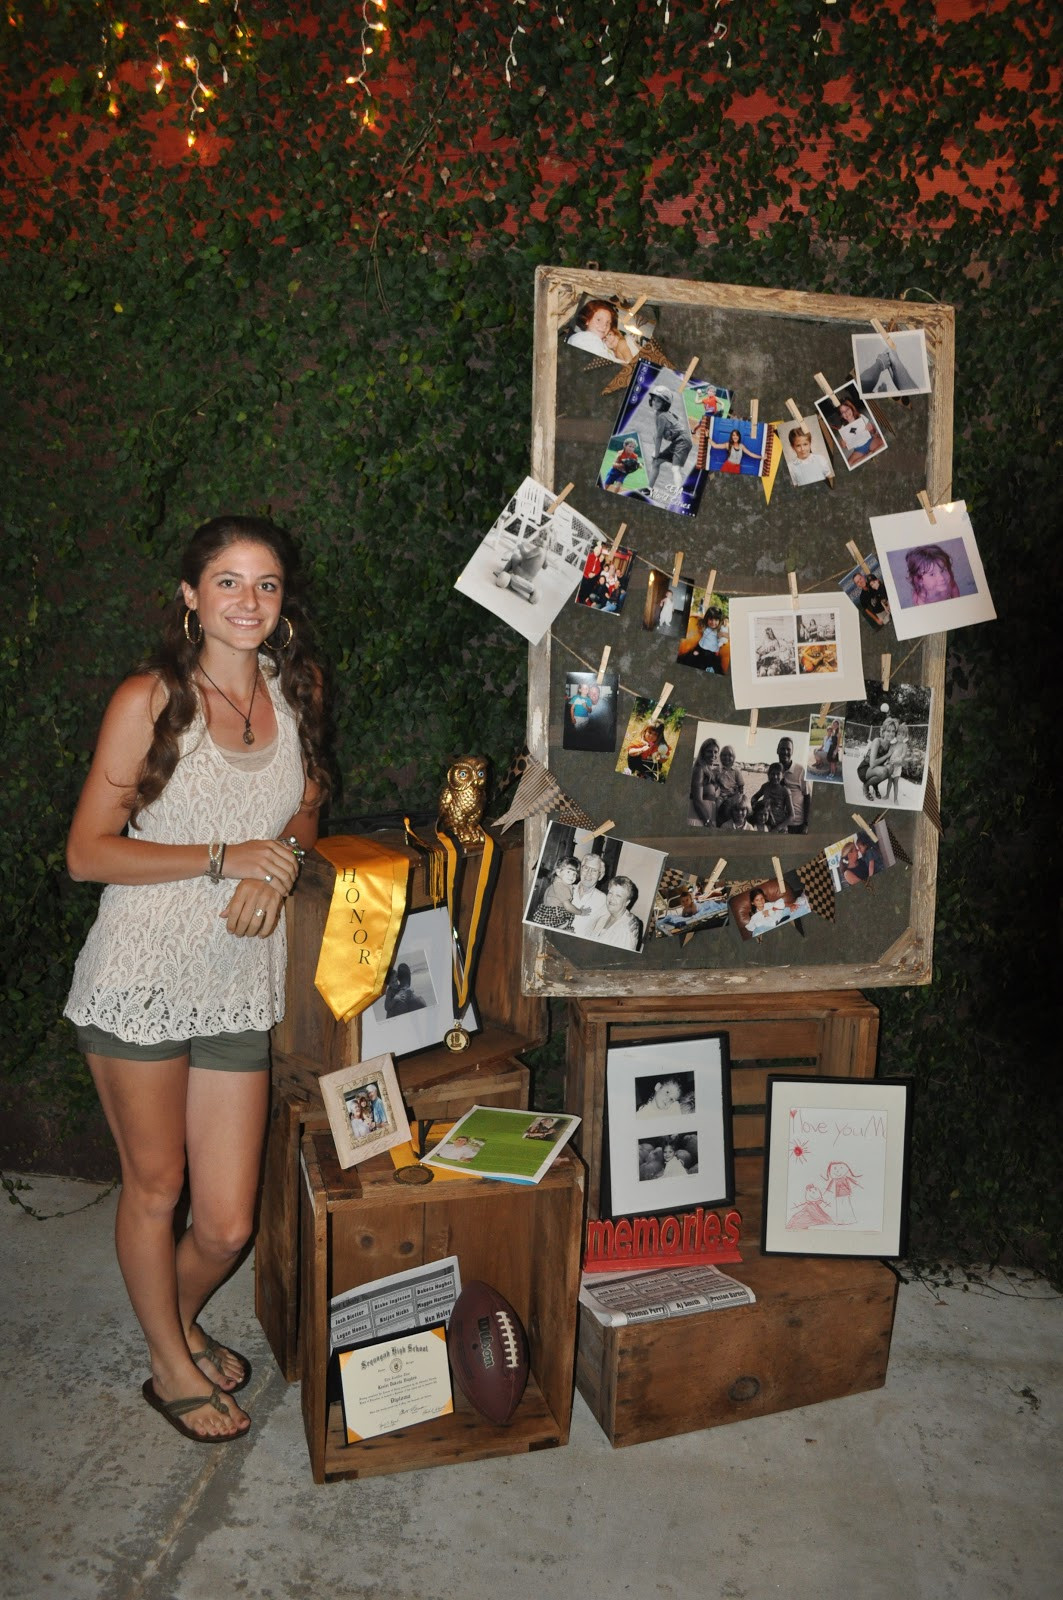 Graduation Party Picture Display Ideas
 Hippie Chick Graduation Party for our Family